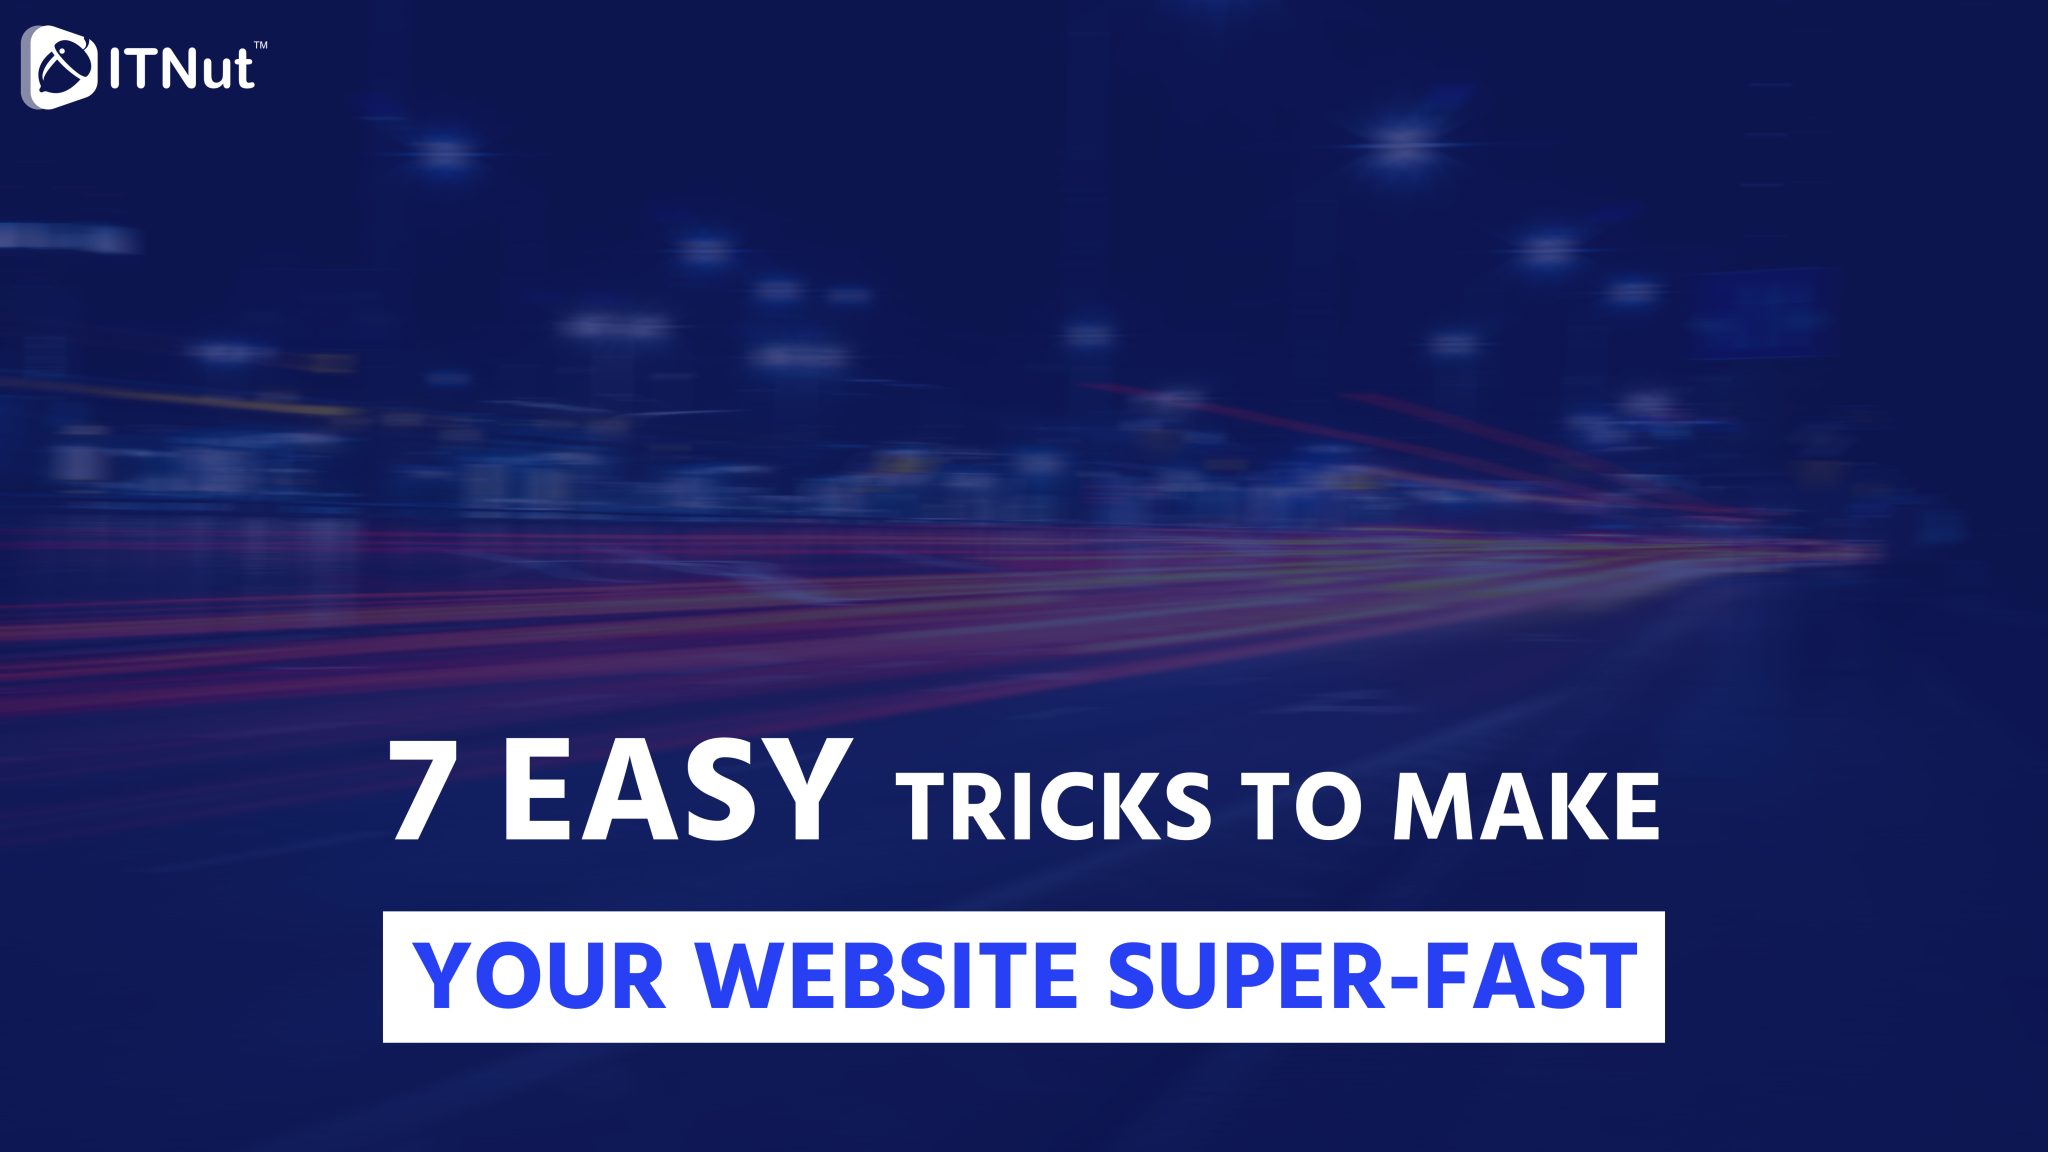 You are currently viewing 7 Easy Tricks to Make Your Website Super-Fast